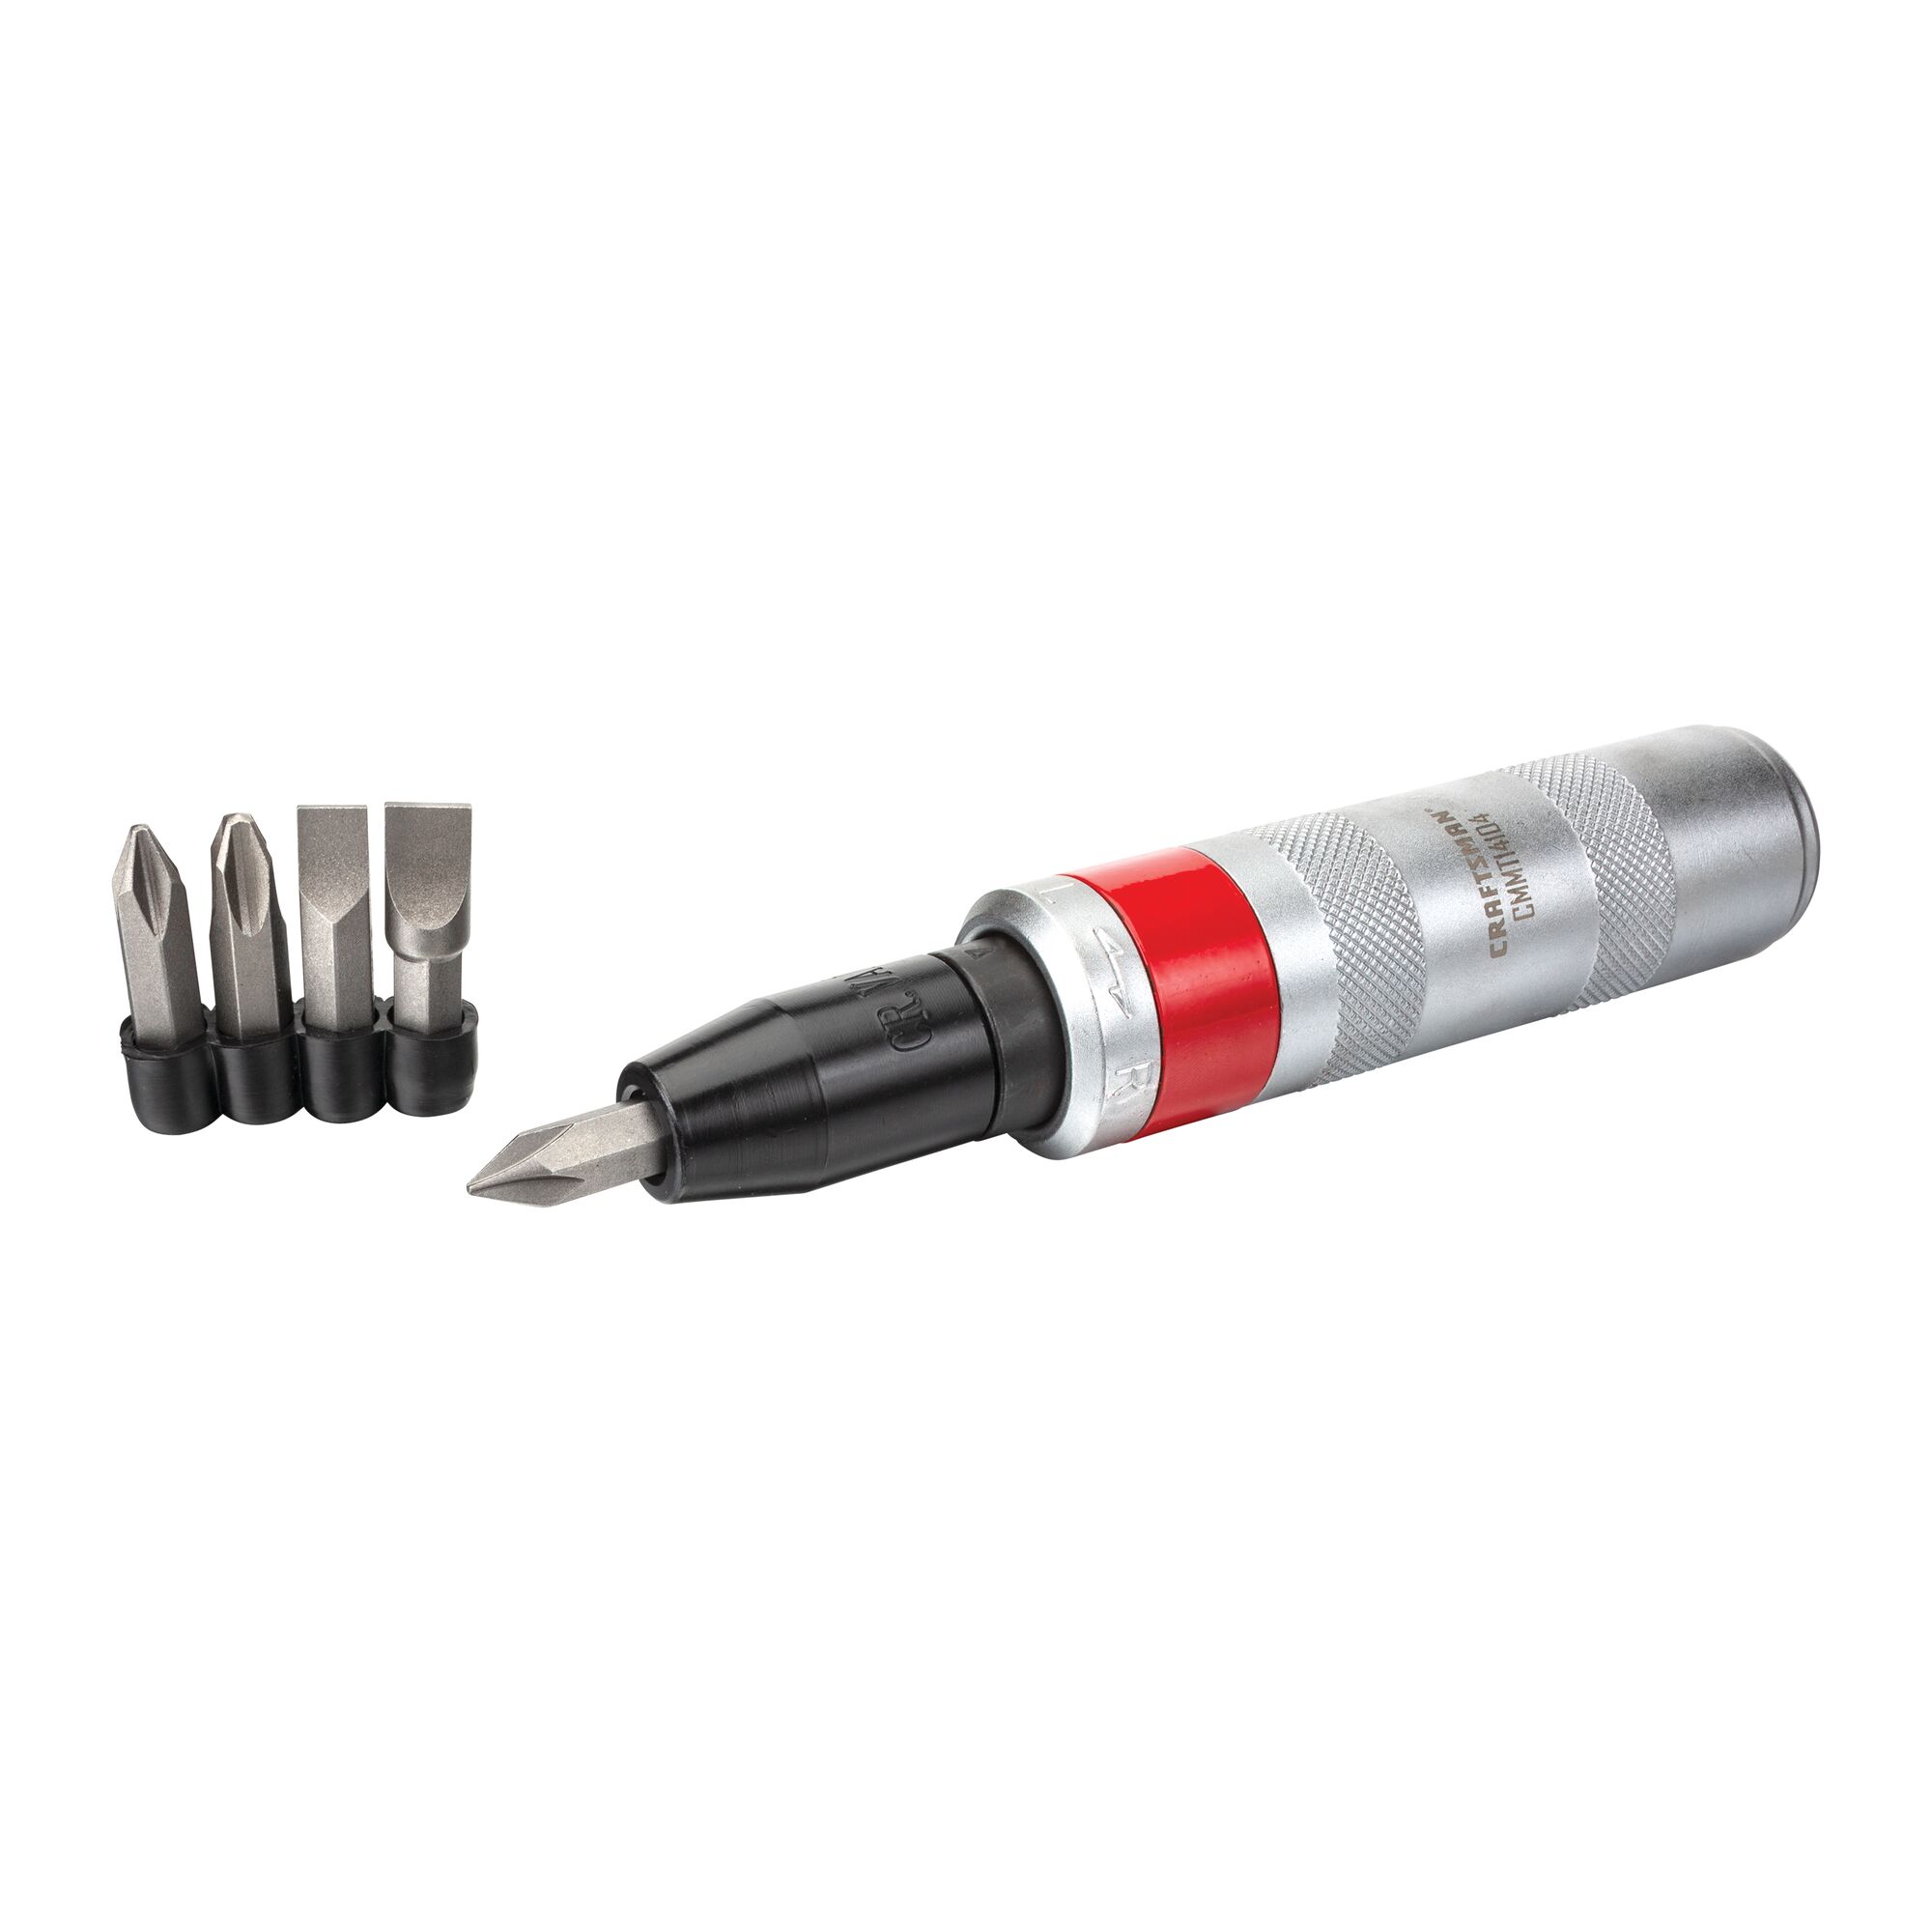 View of CRAFTSMAN Drills: Impact Driver on white background